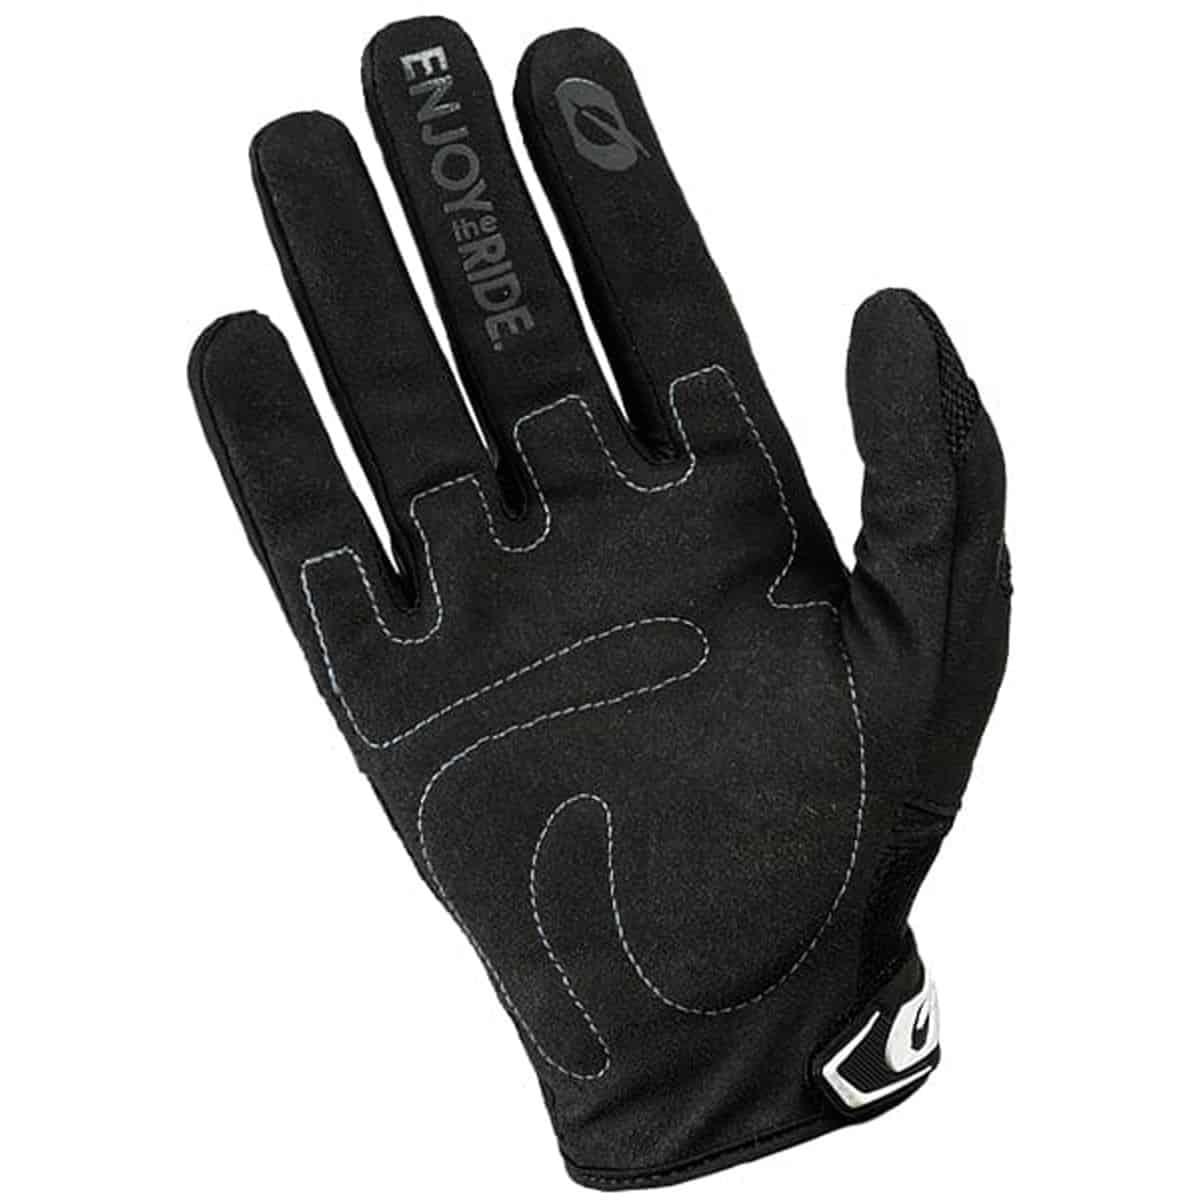 Comfortable off road riding gloves-black-2